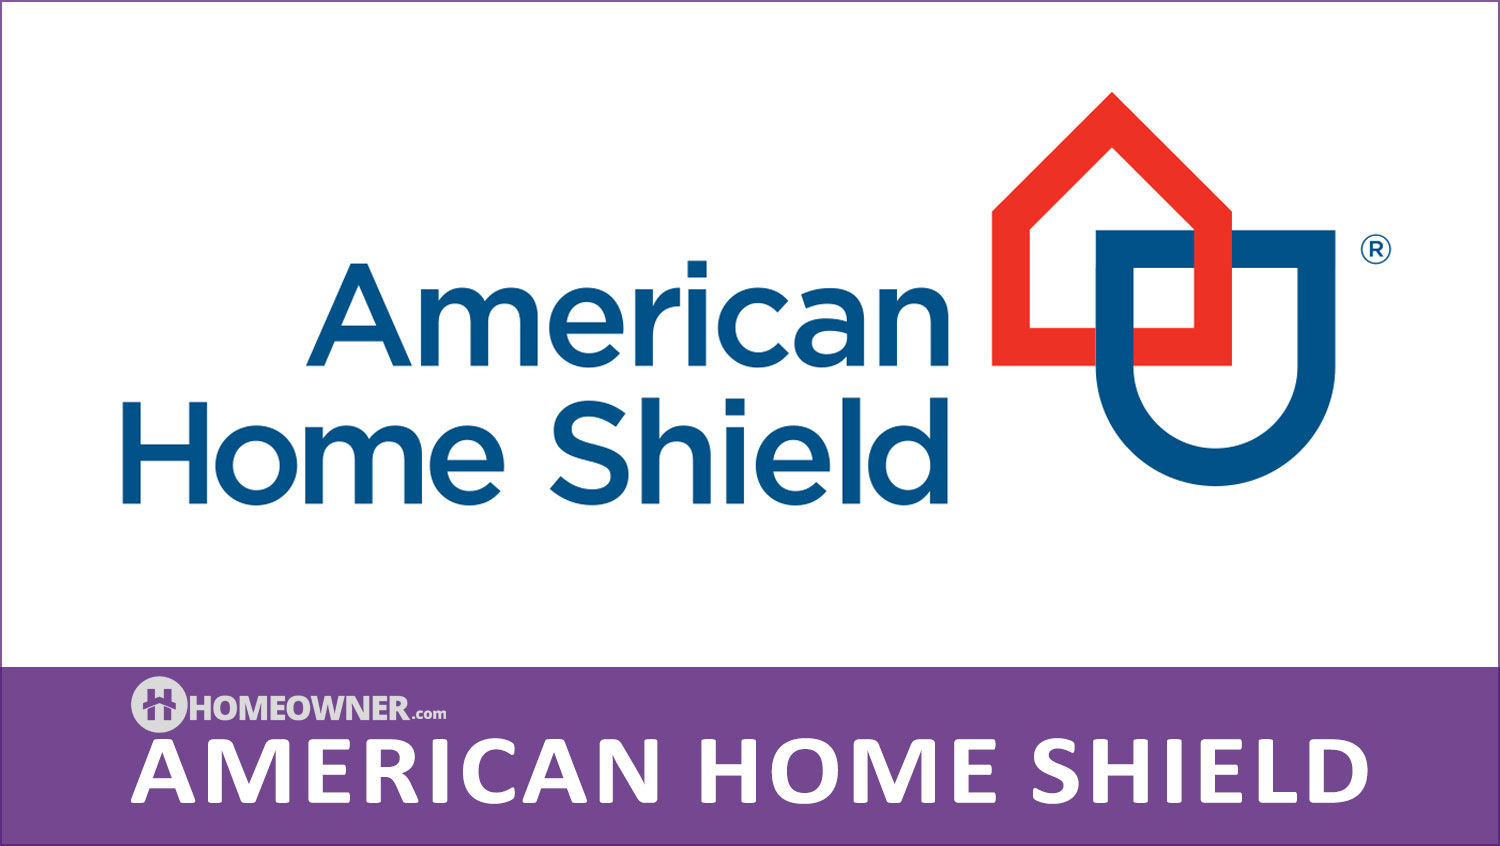 American Home Shield - 2022 Home Warranty Review